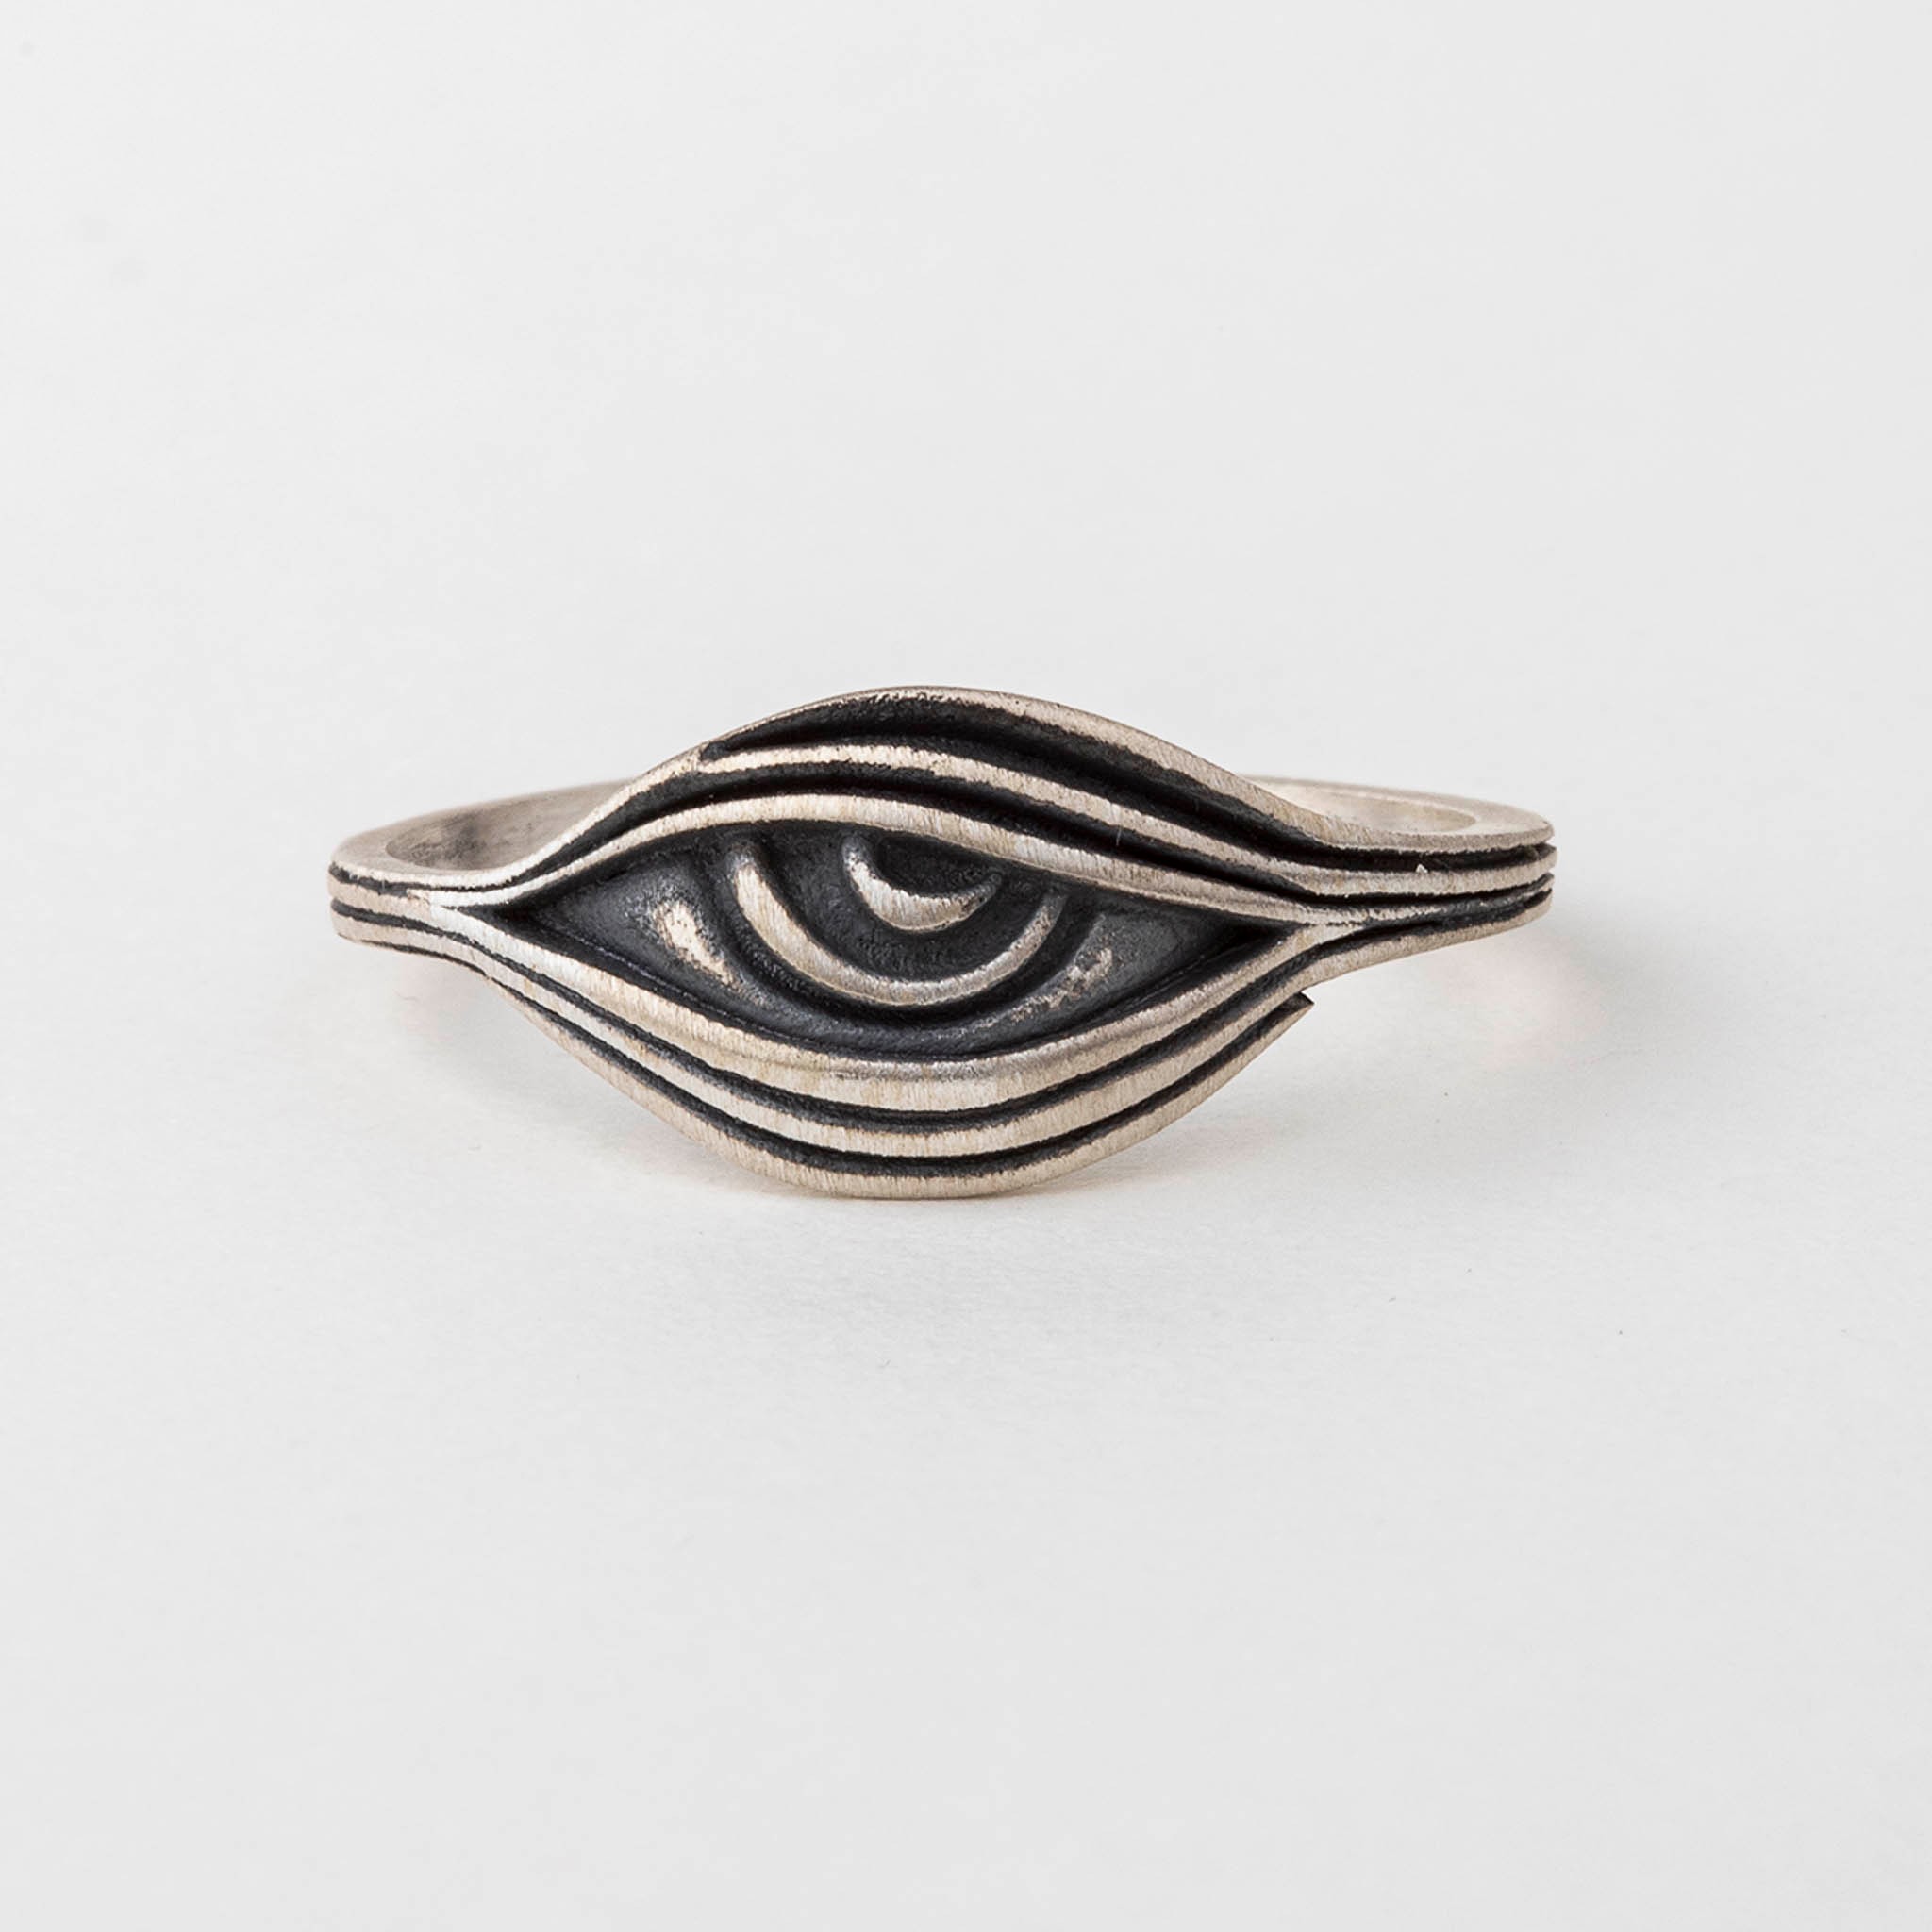 The Lucky Eye Ring - Oxidized